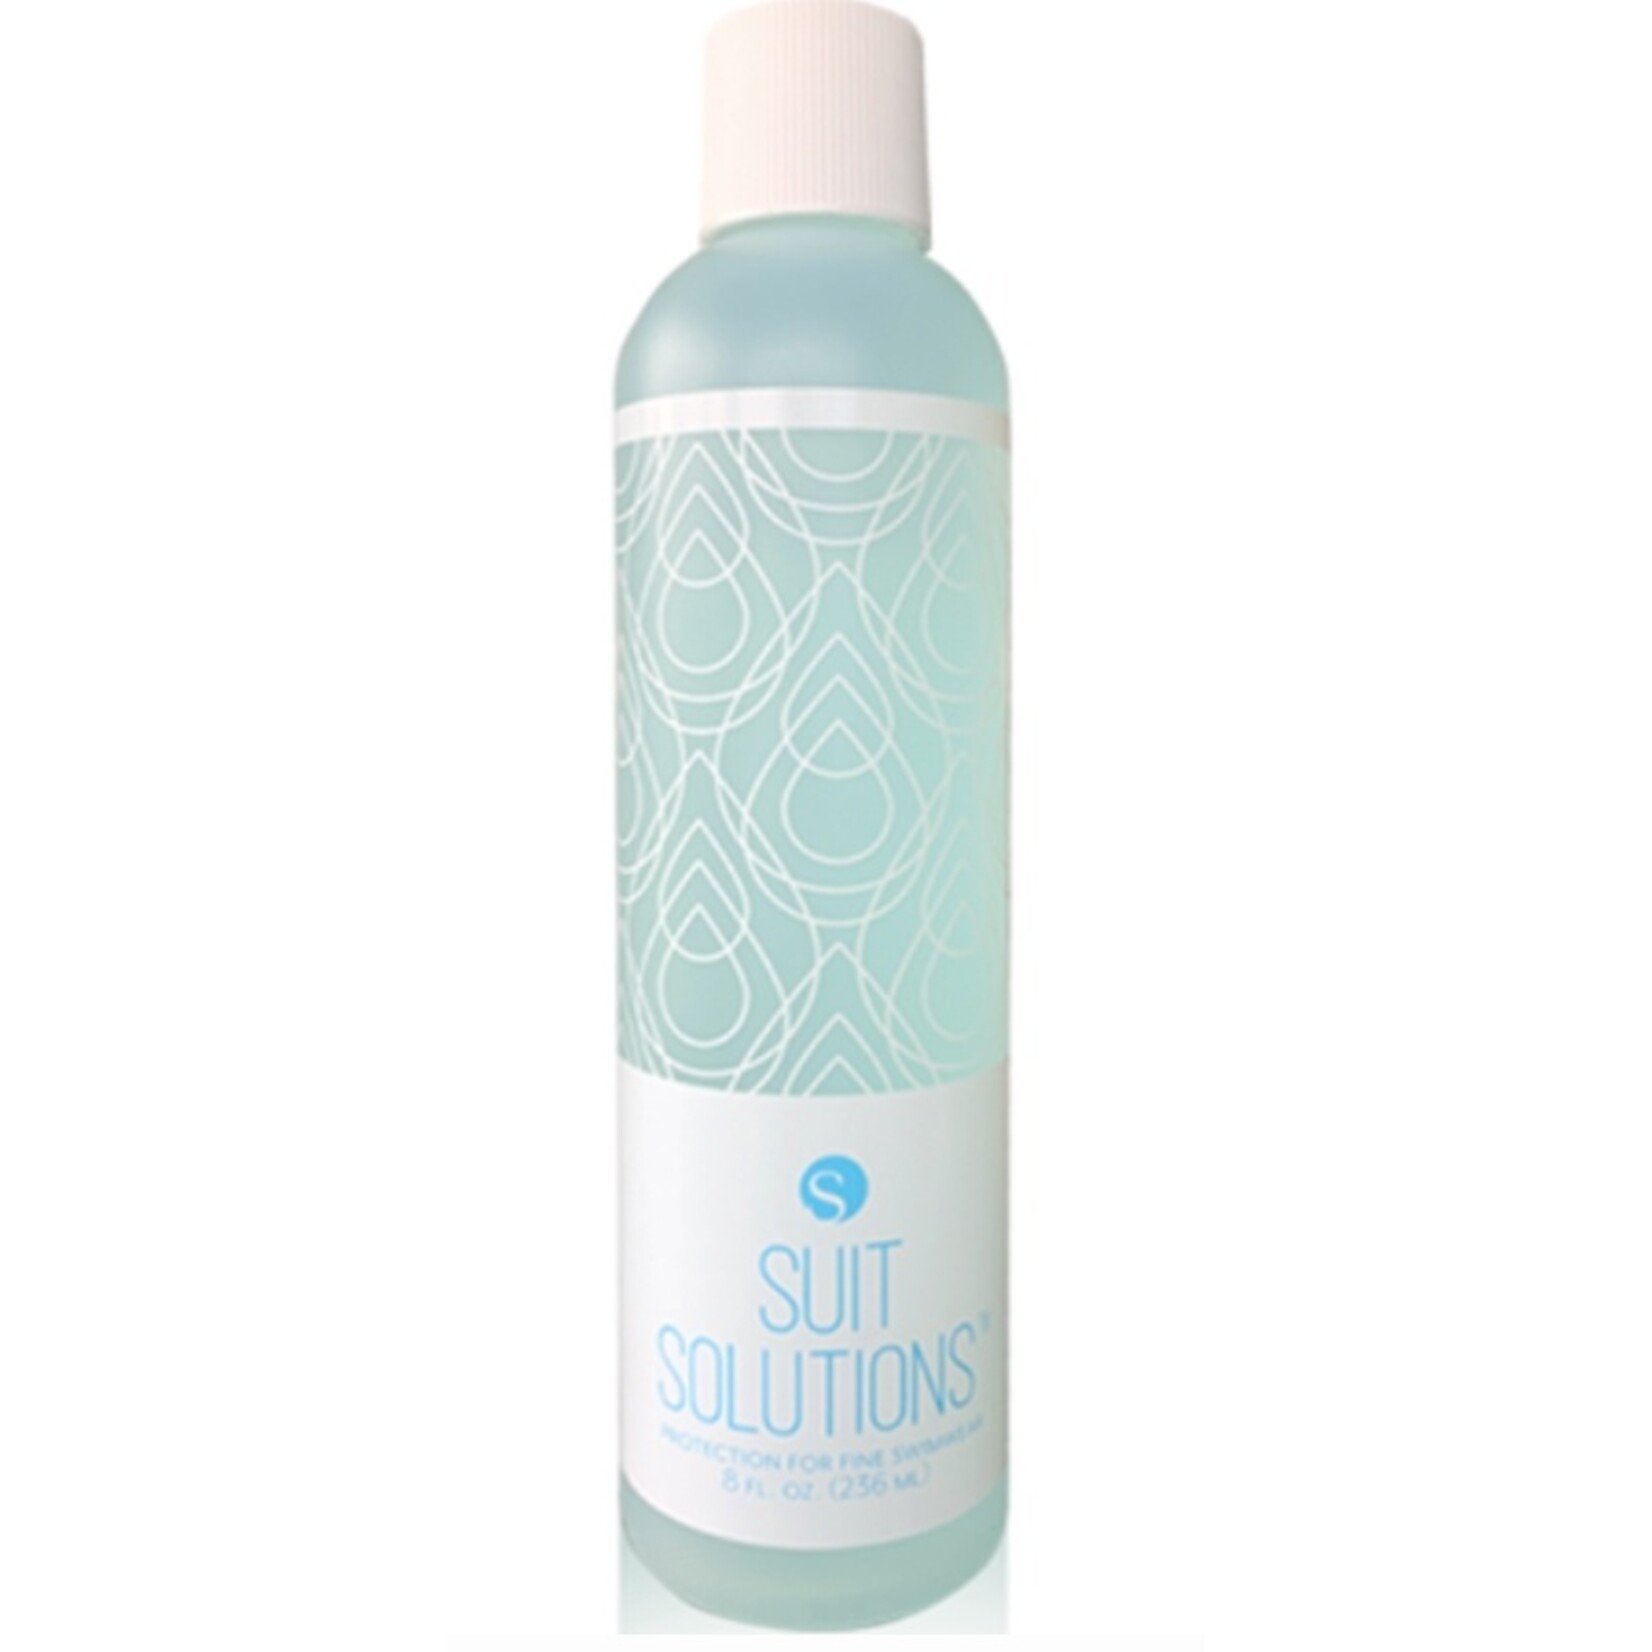 Summer Solutions Suit Solutions 8 oz.